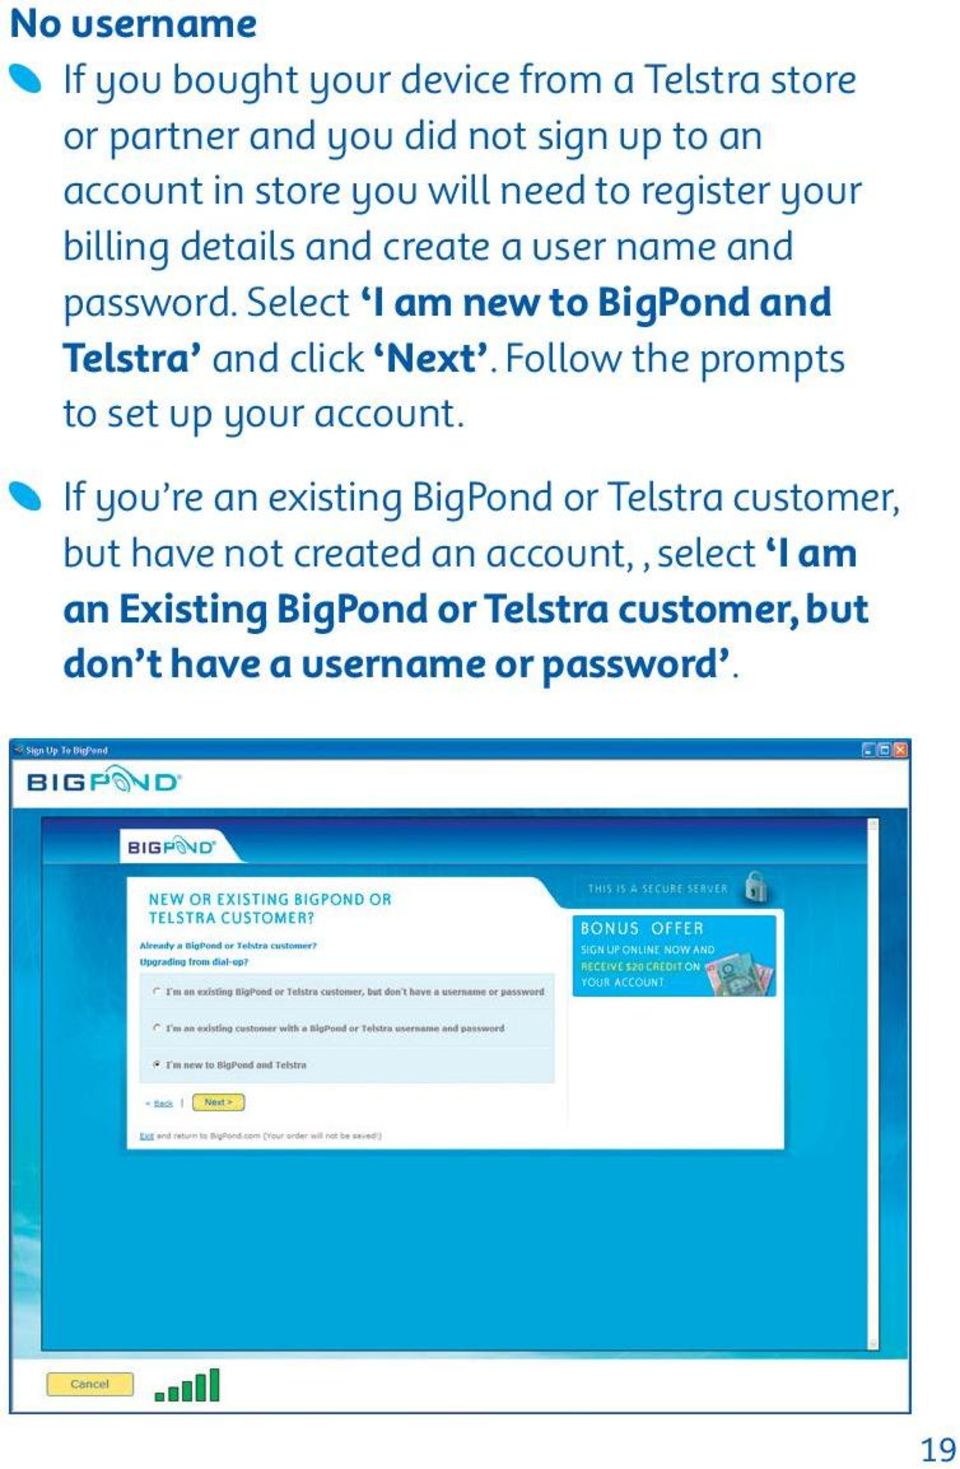 Select I am new to BigPond and Telstra and click Next. Follow the prompts to set up your account.